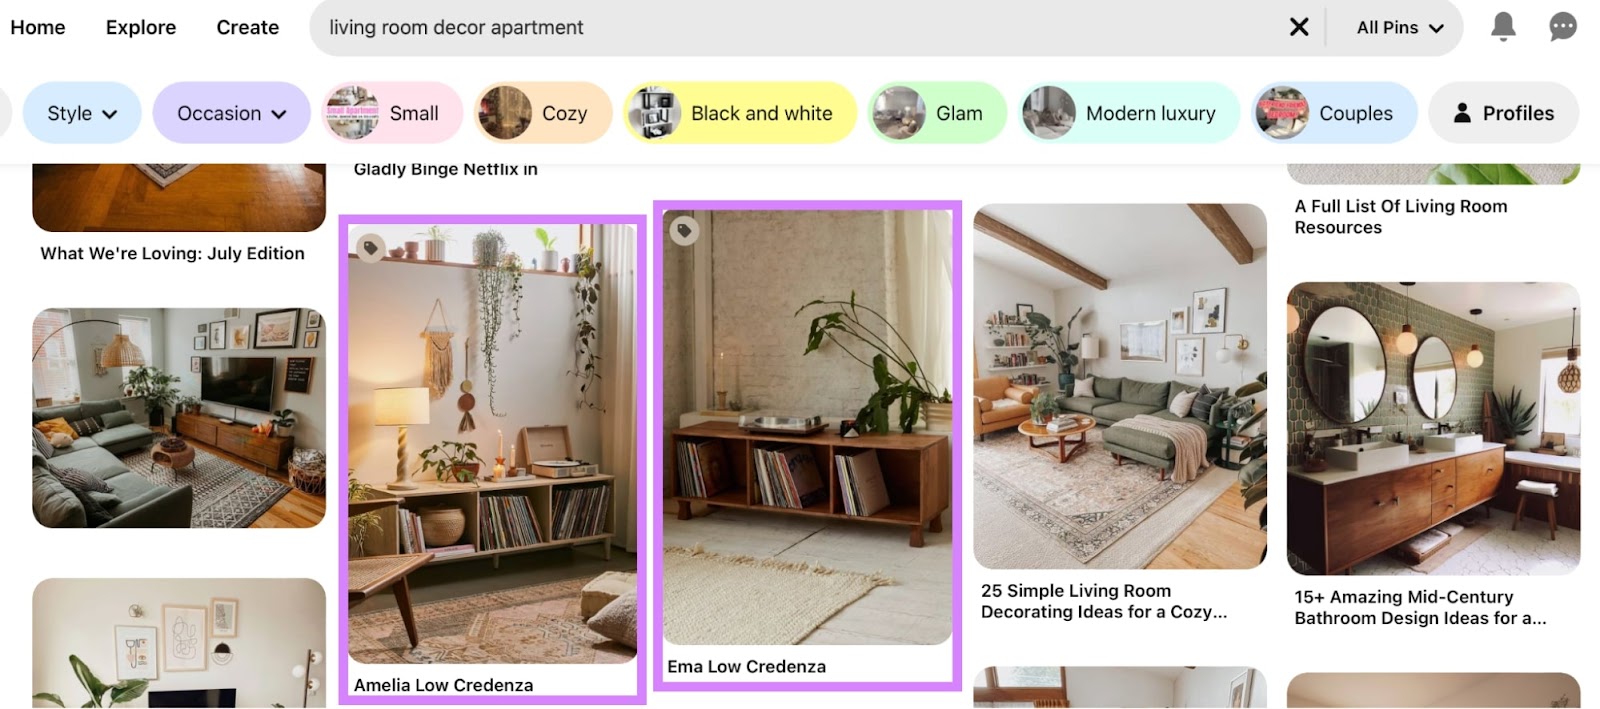 Pinterest search results for living room decor apartment